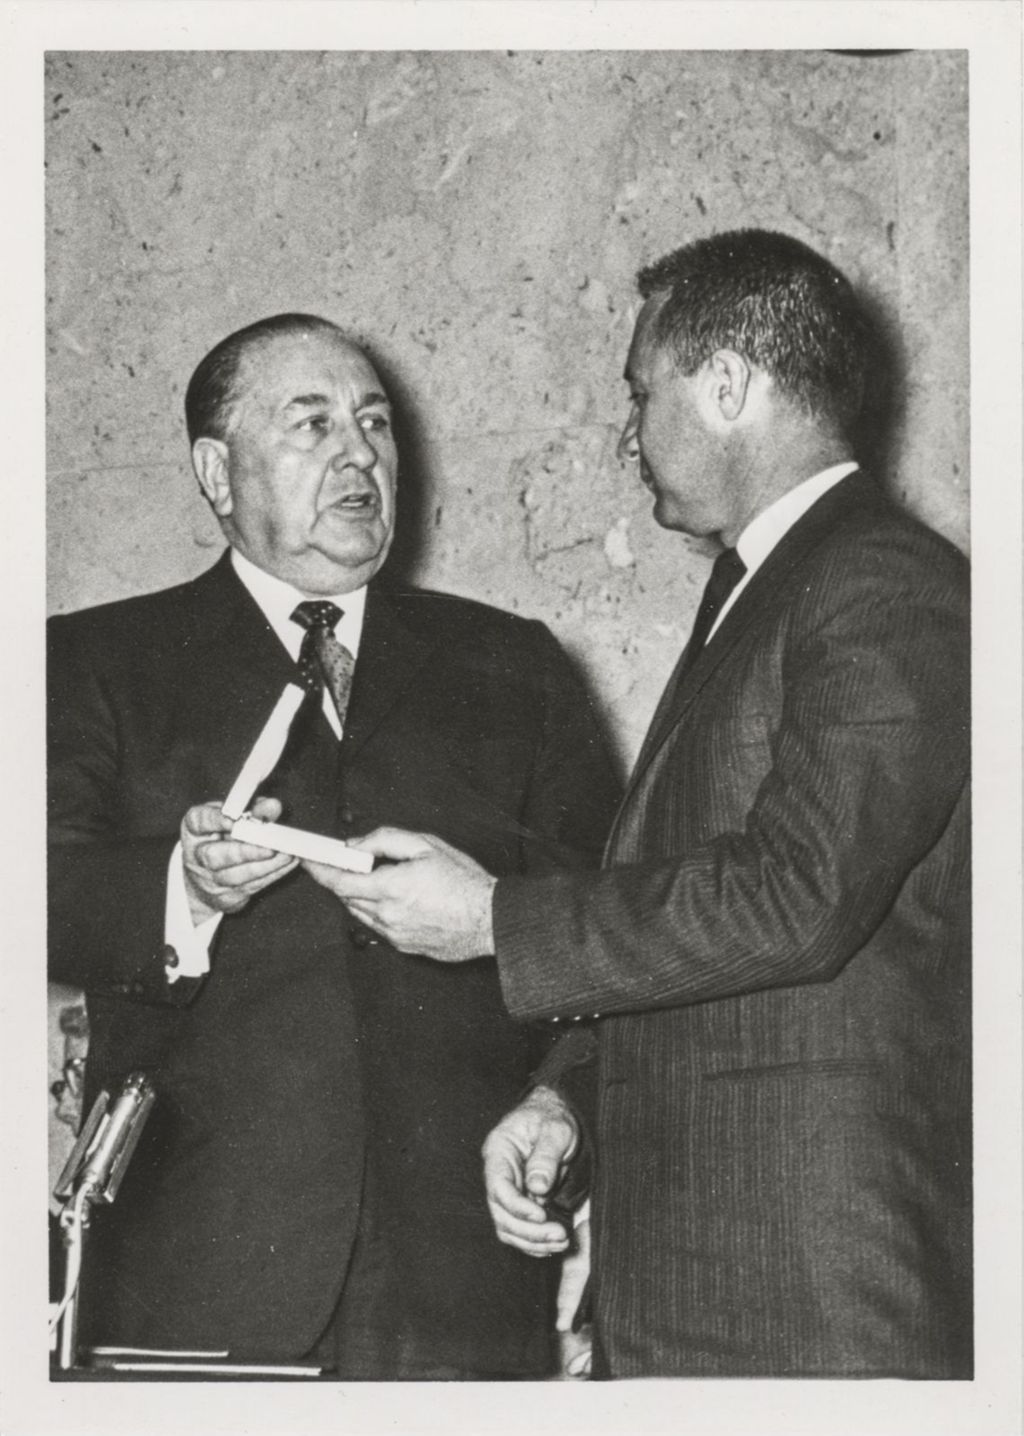 Miniature of Astronaut Gus Grissom accepts an award from Richard J. Daley